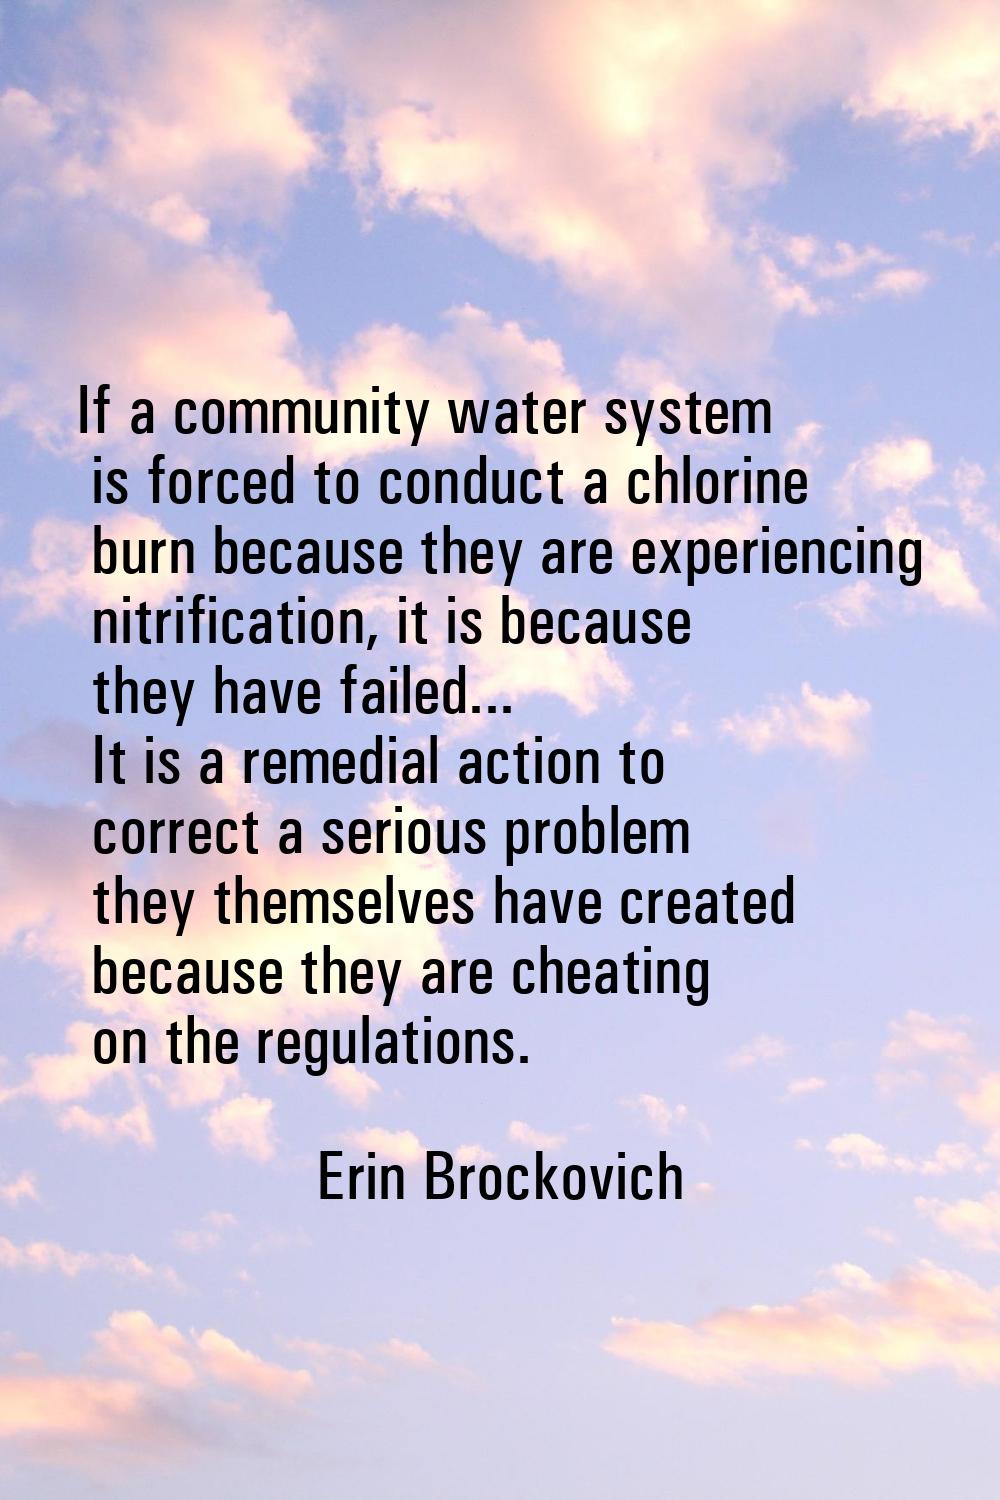 If a community water system is forced to conduct a chlorine burn because they are experiencing nitr